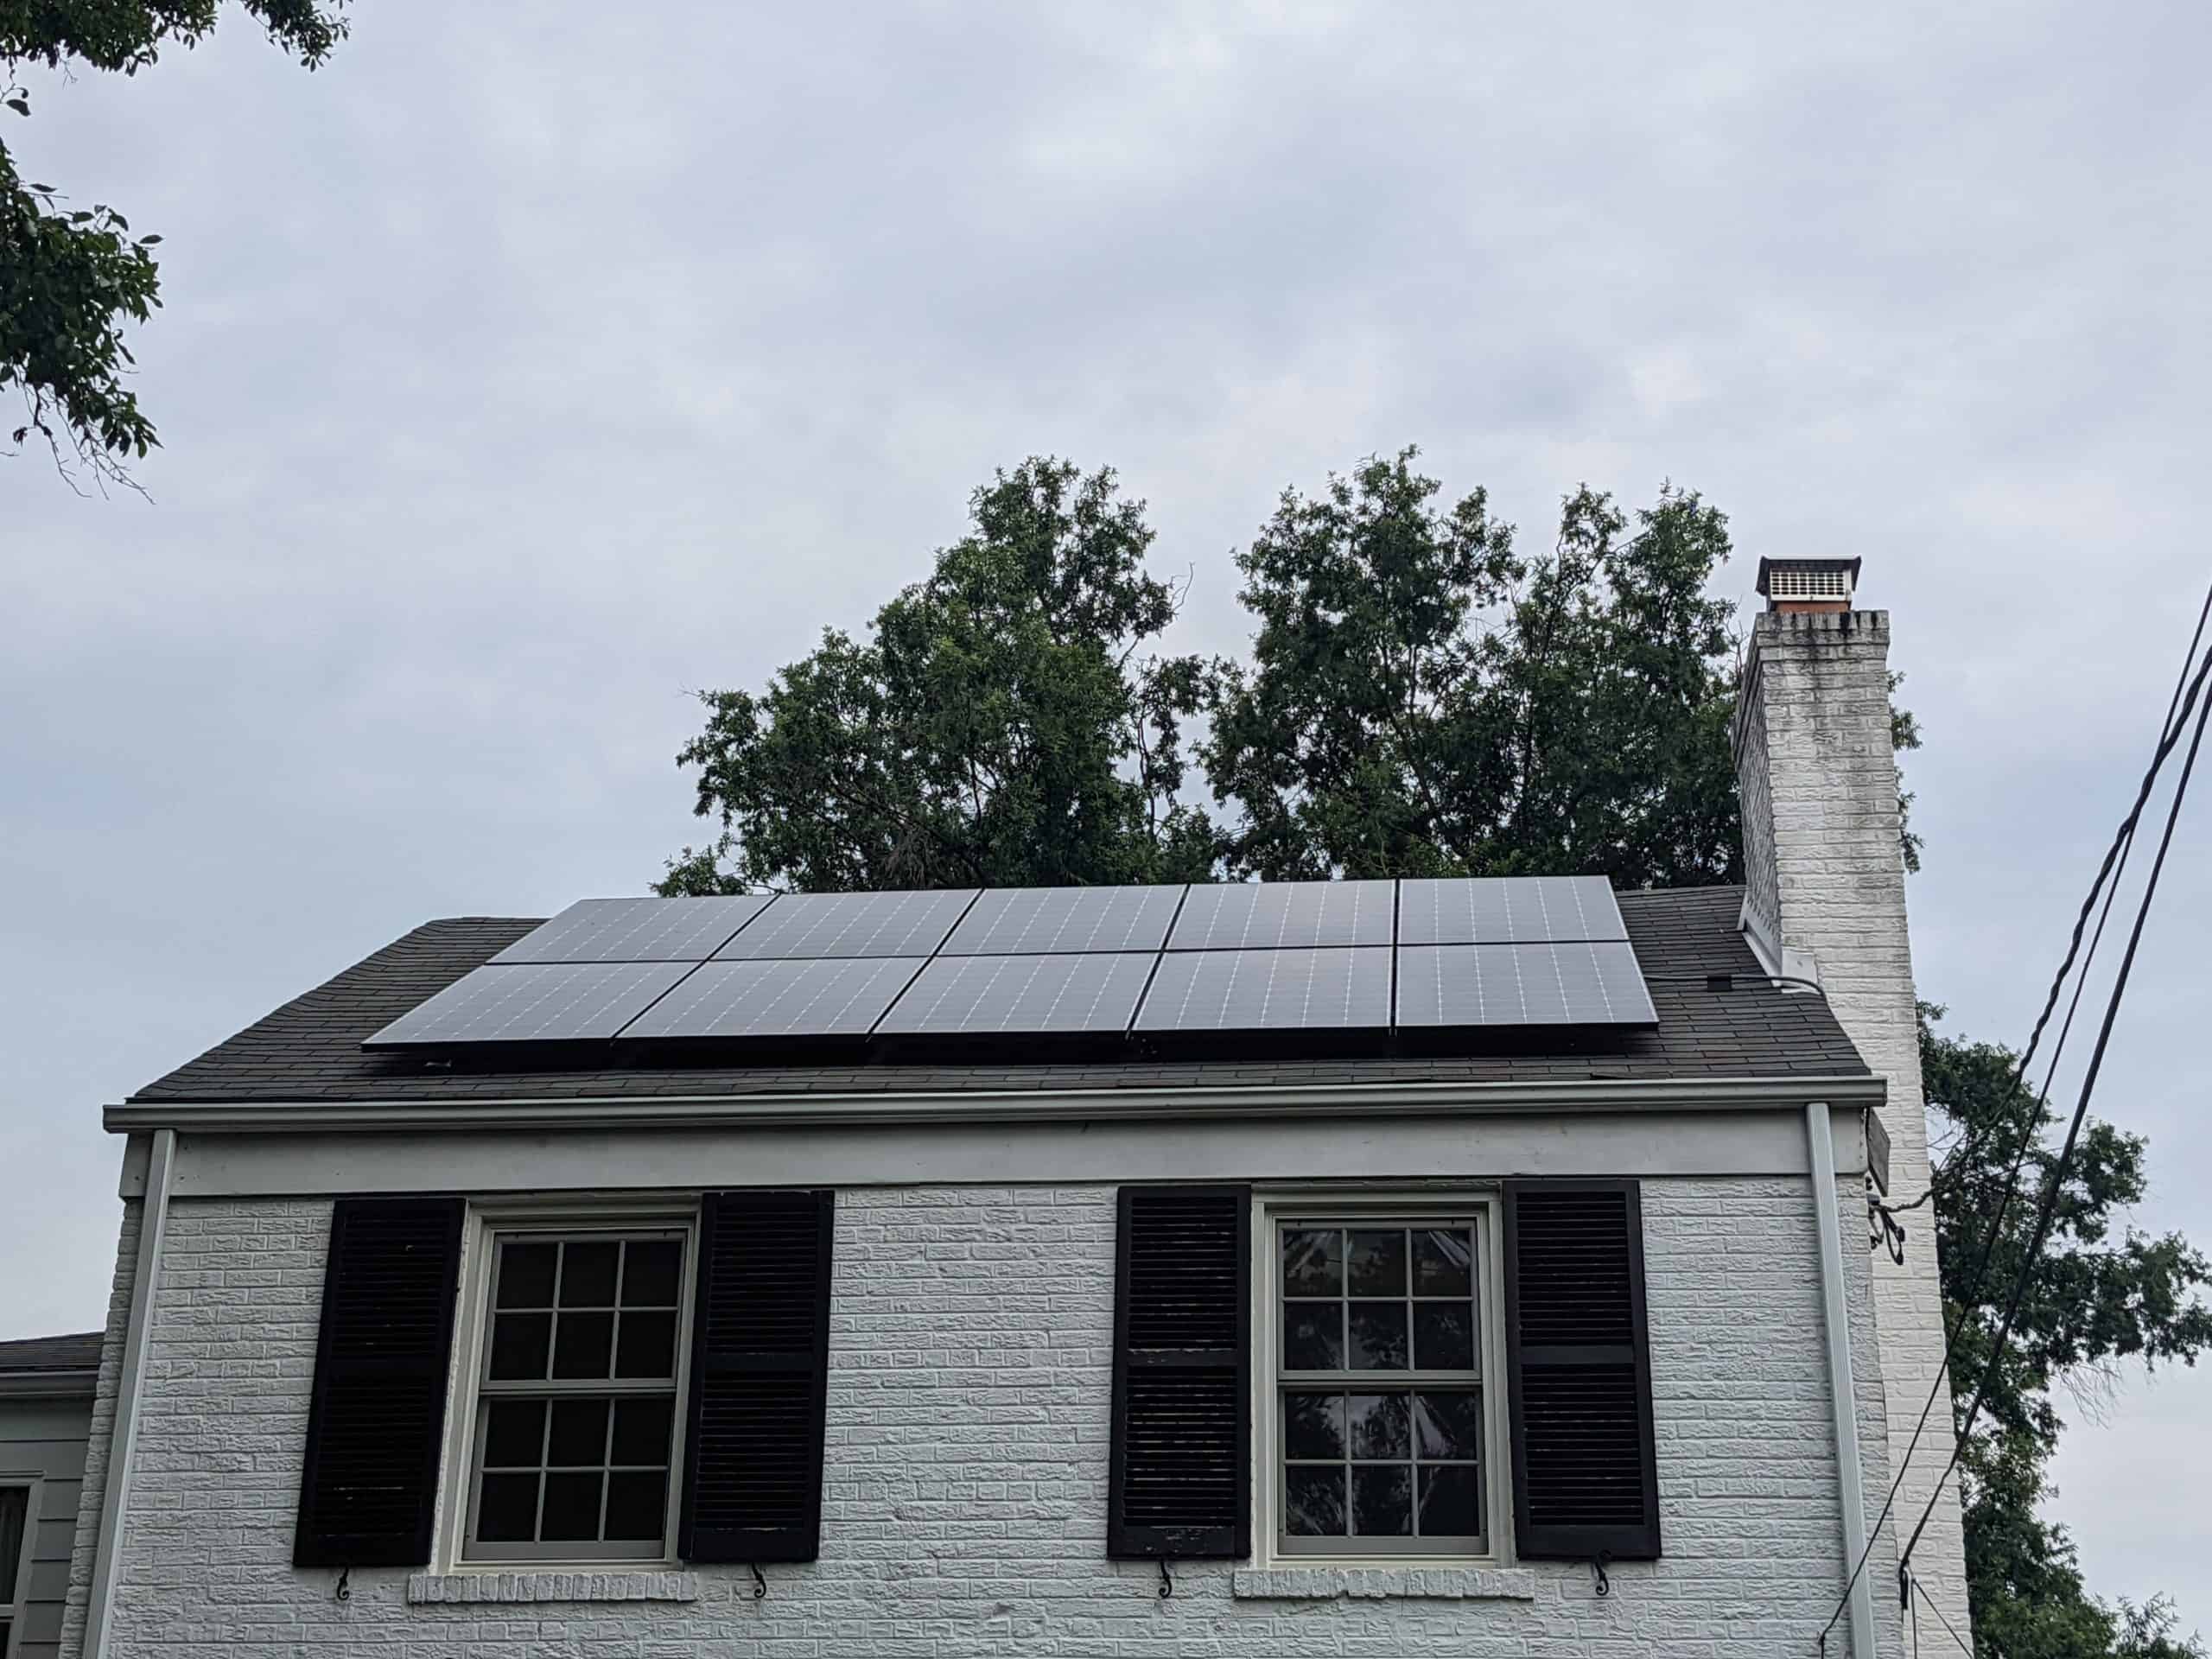 This 4.25 Kw solar system we installed for Jim E. has a potential to save $25,554.27 over 25 years!!